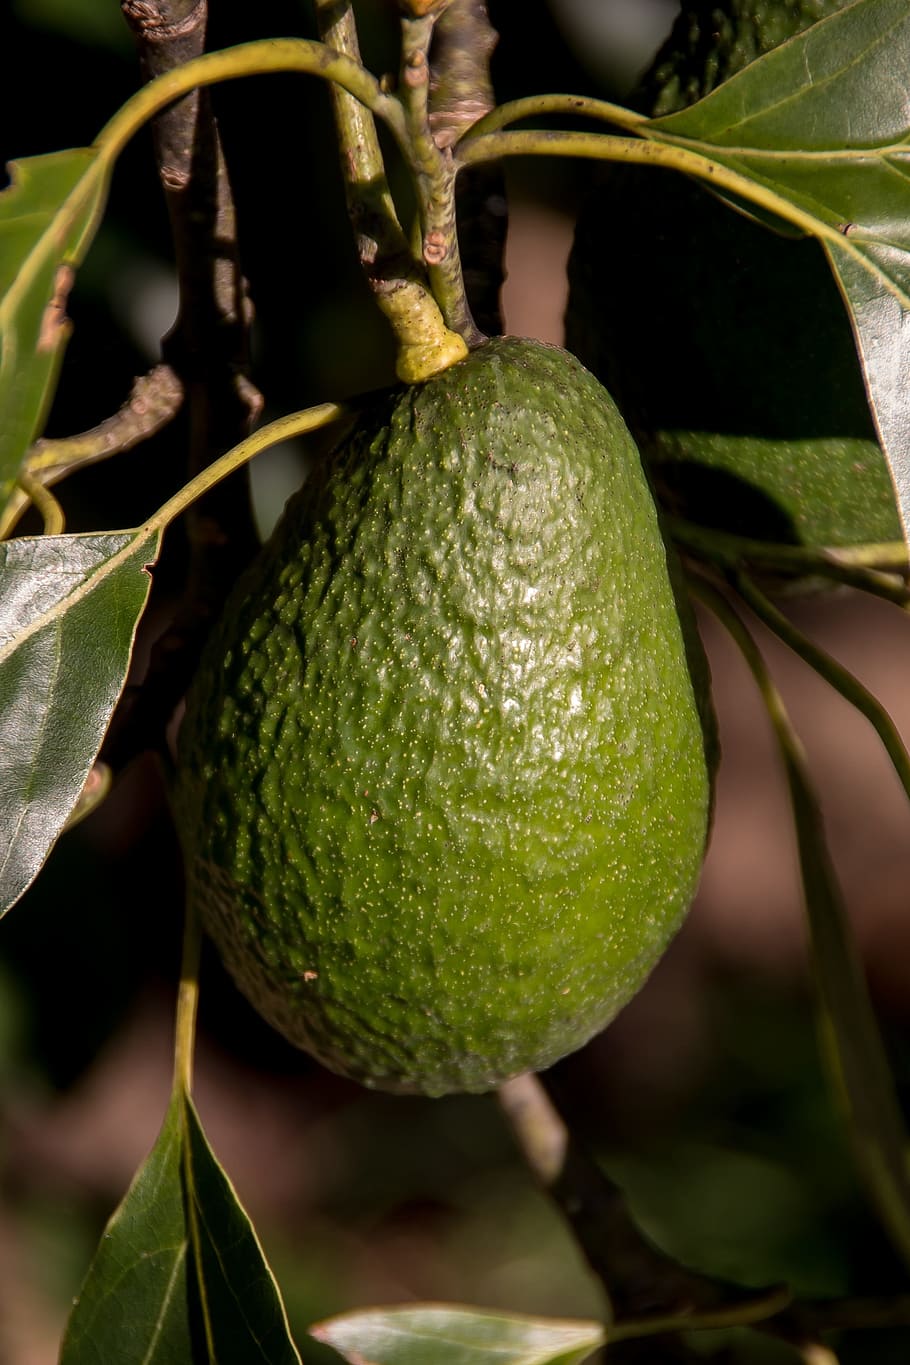 hass avocado, fruit, tree, ripe, food, healthy, green, growing, close-up, food and drink